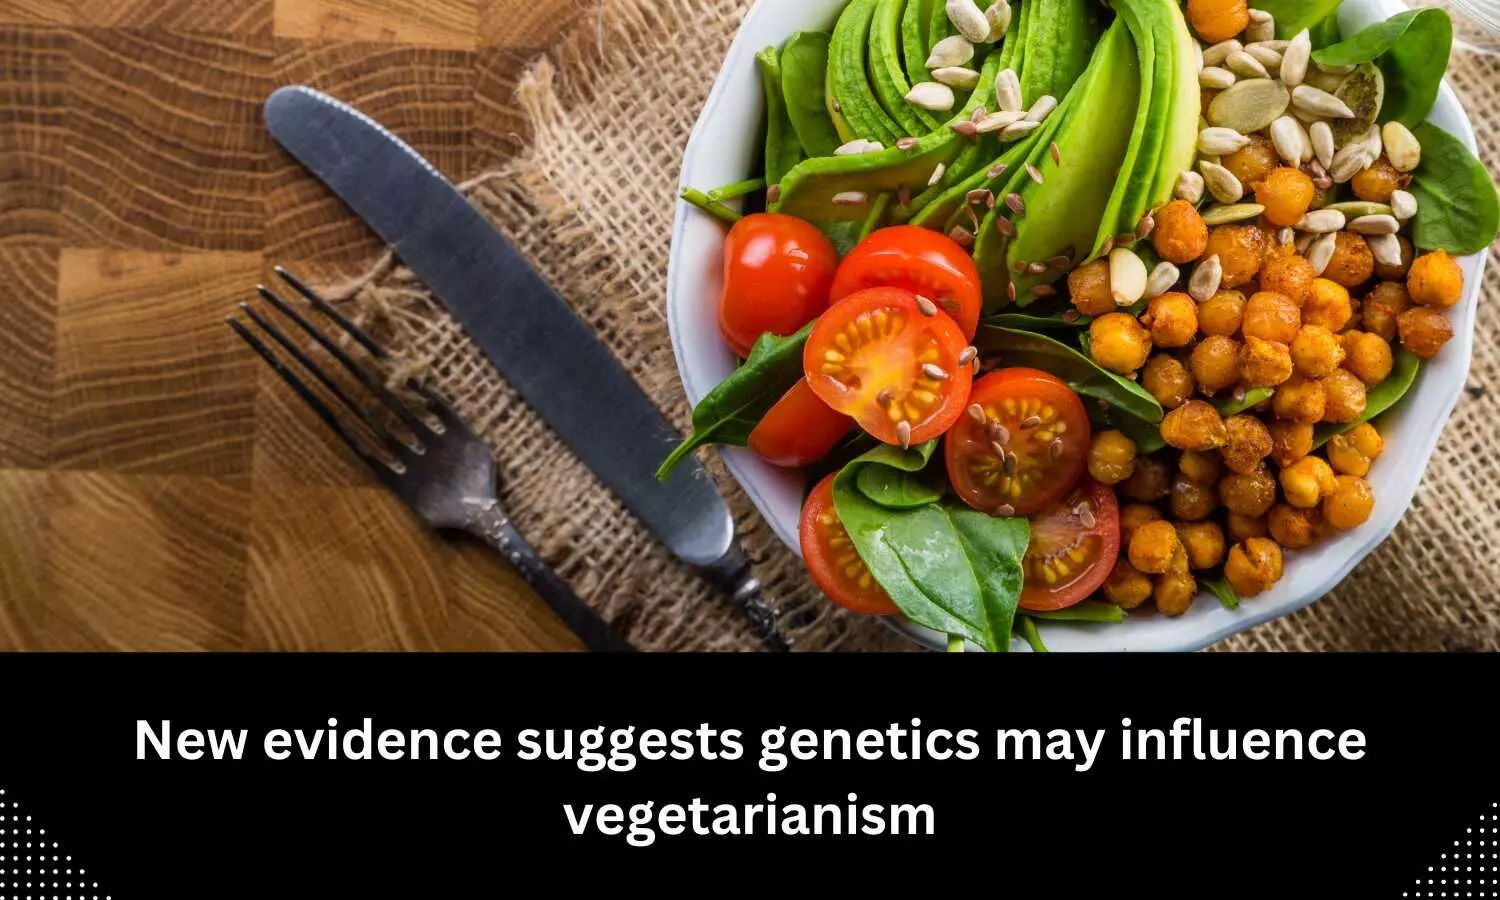 New evidence suggests genetics may influence vegetarianism